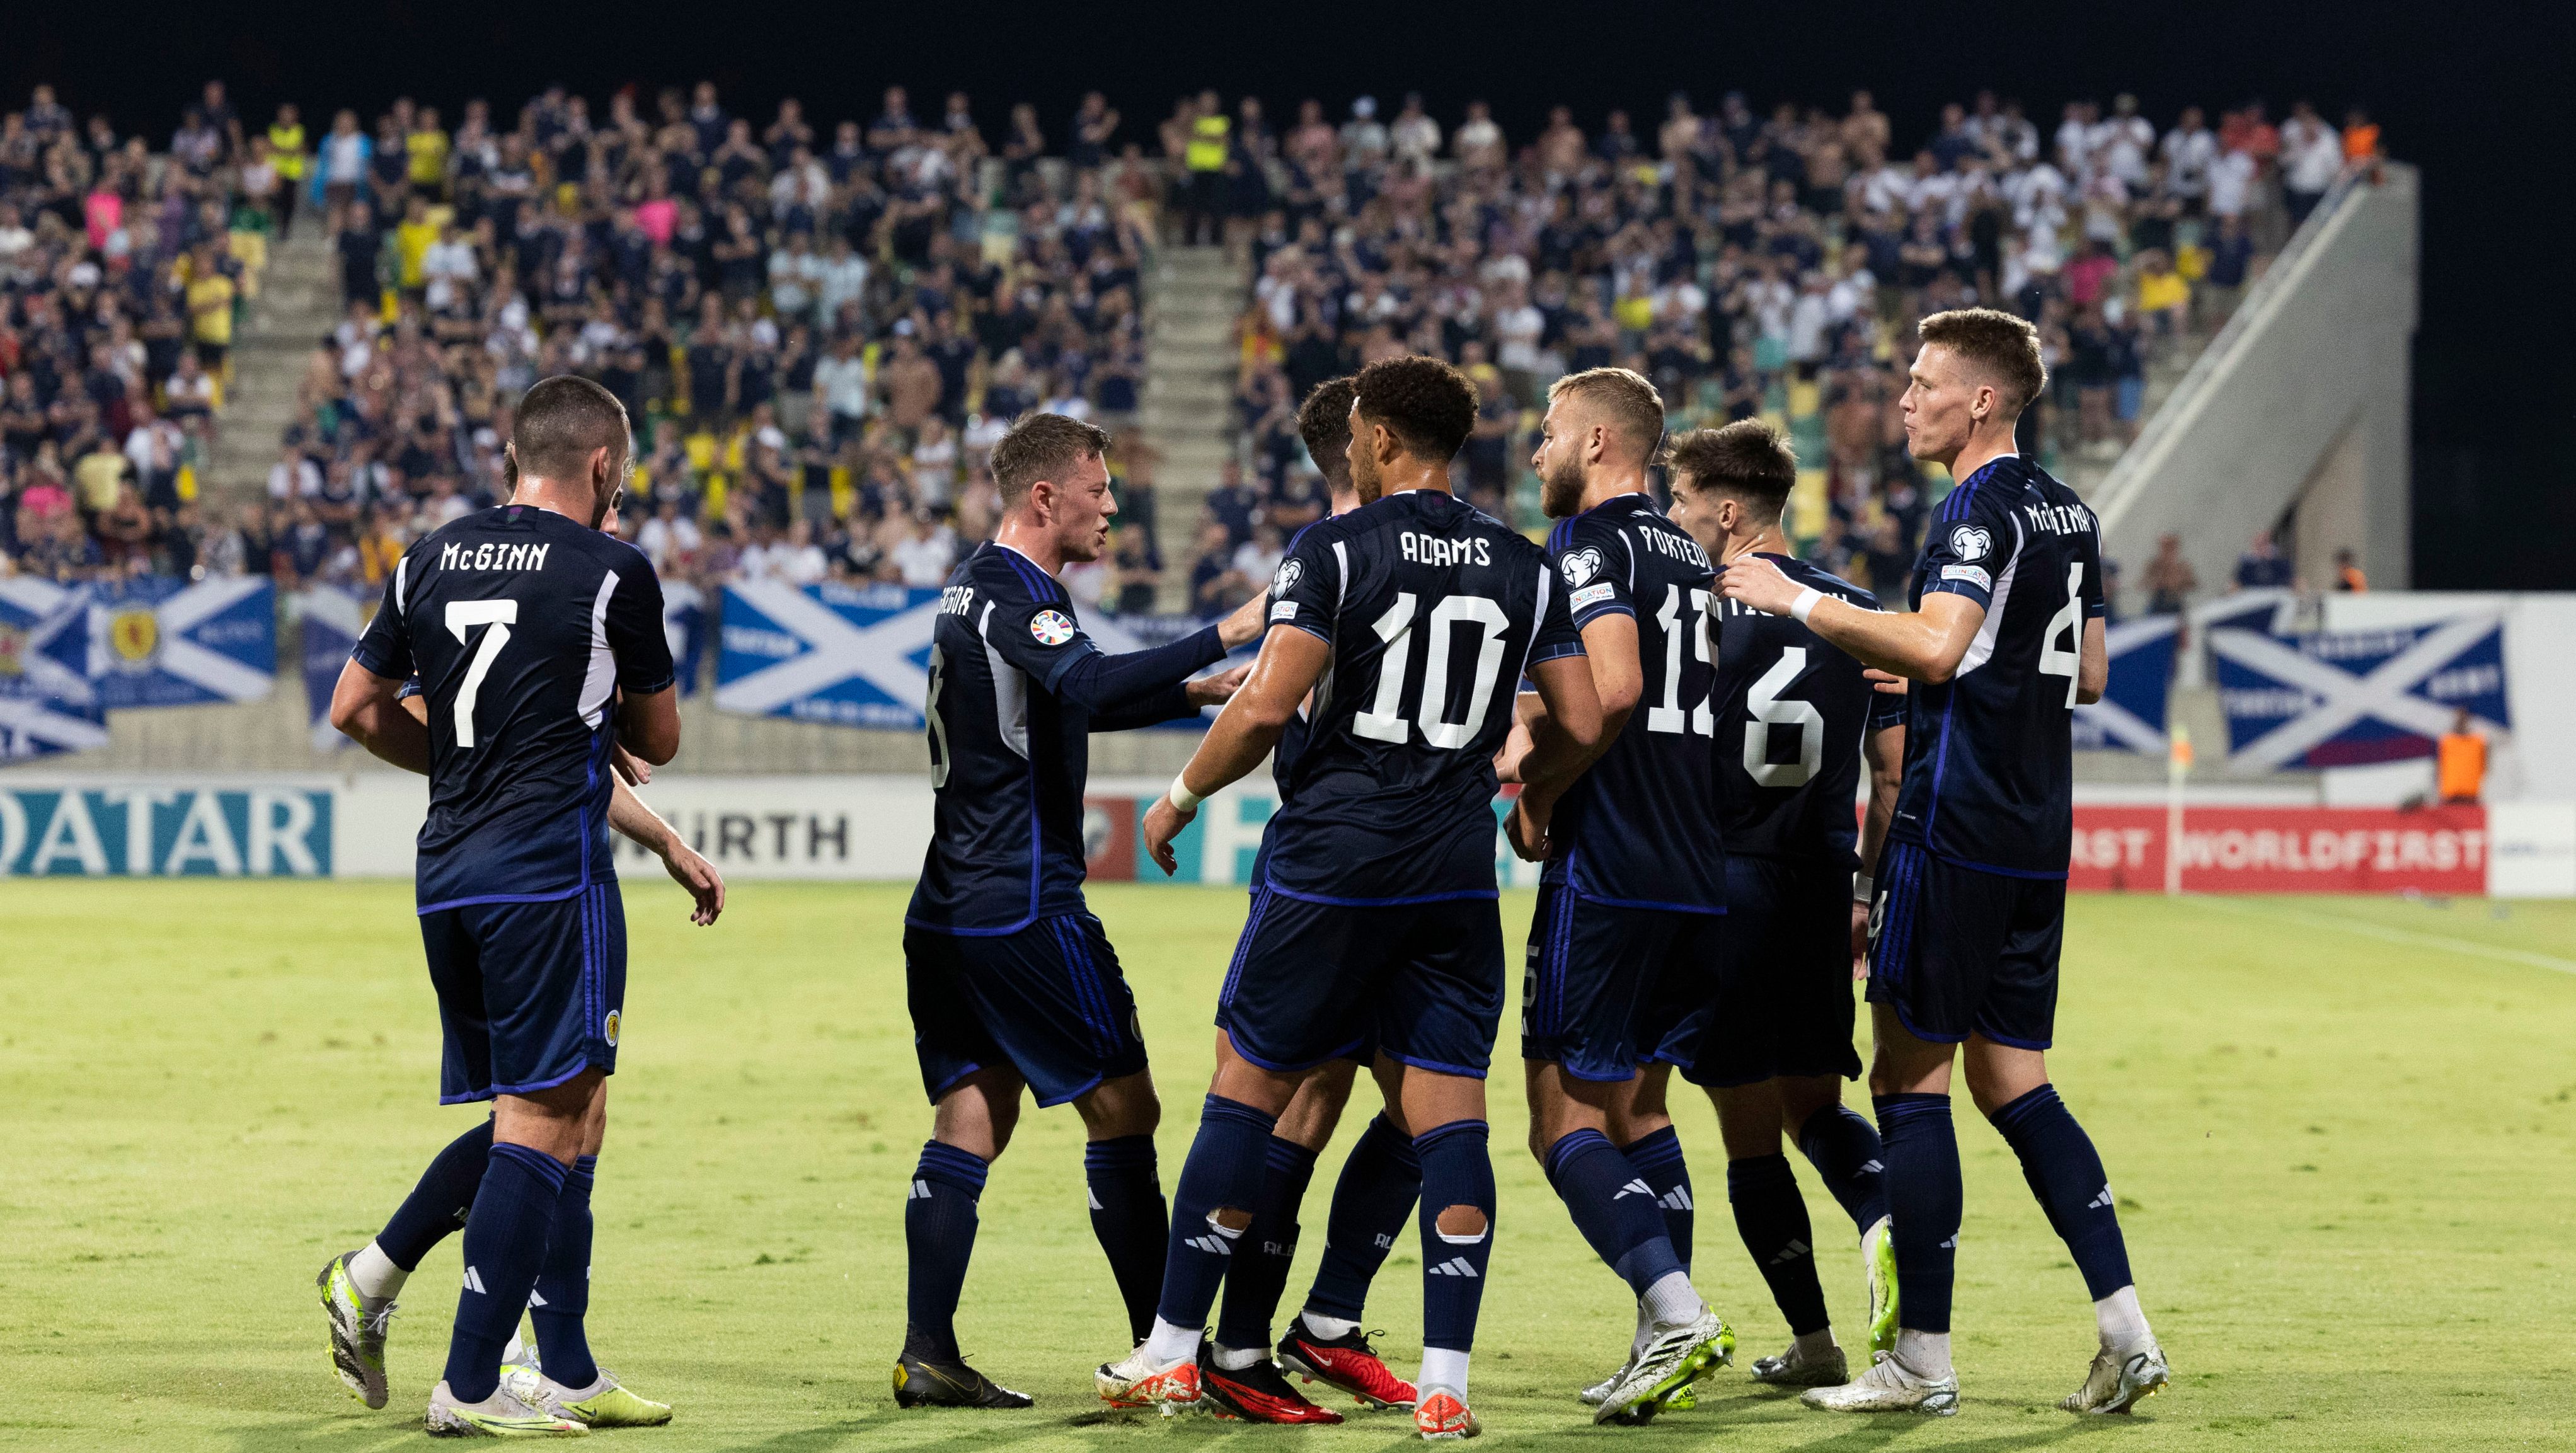 Scotland enjoyed a comprehensive victory over Cyprus to remain top of Group A.